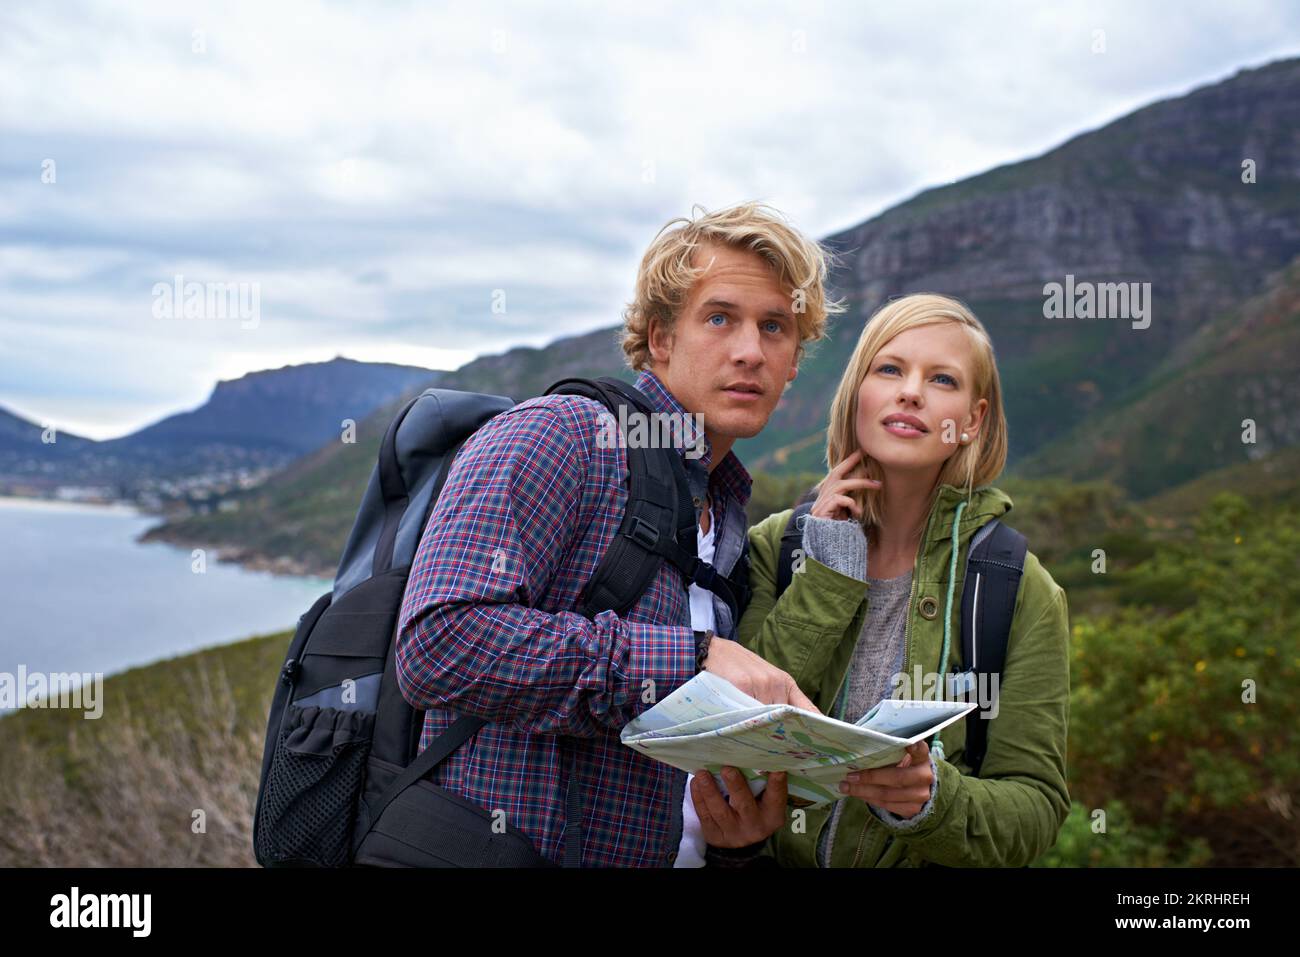 How do we get to the very top. Two backpackers with a map exploring nature. Stock Photo